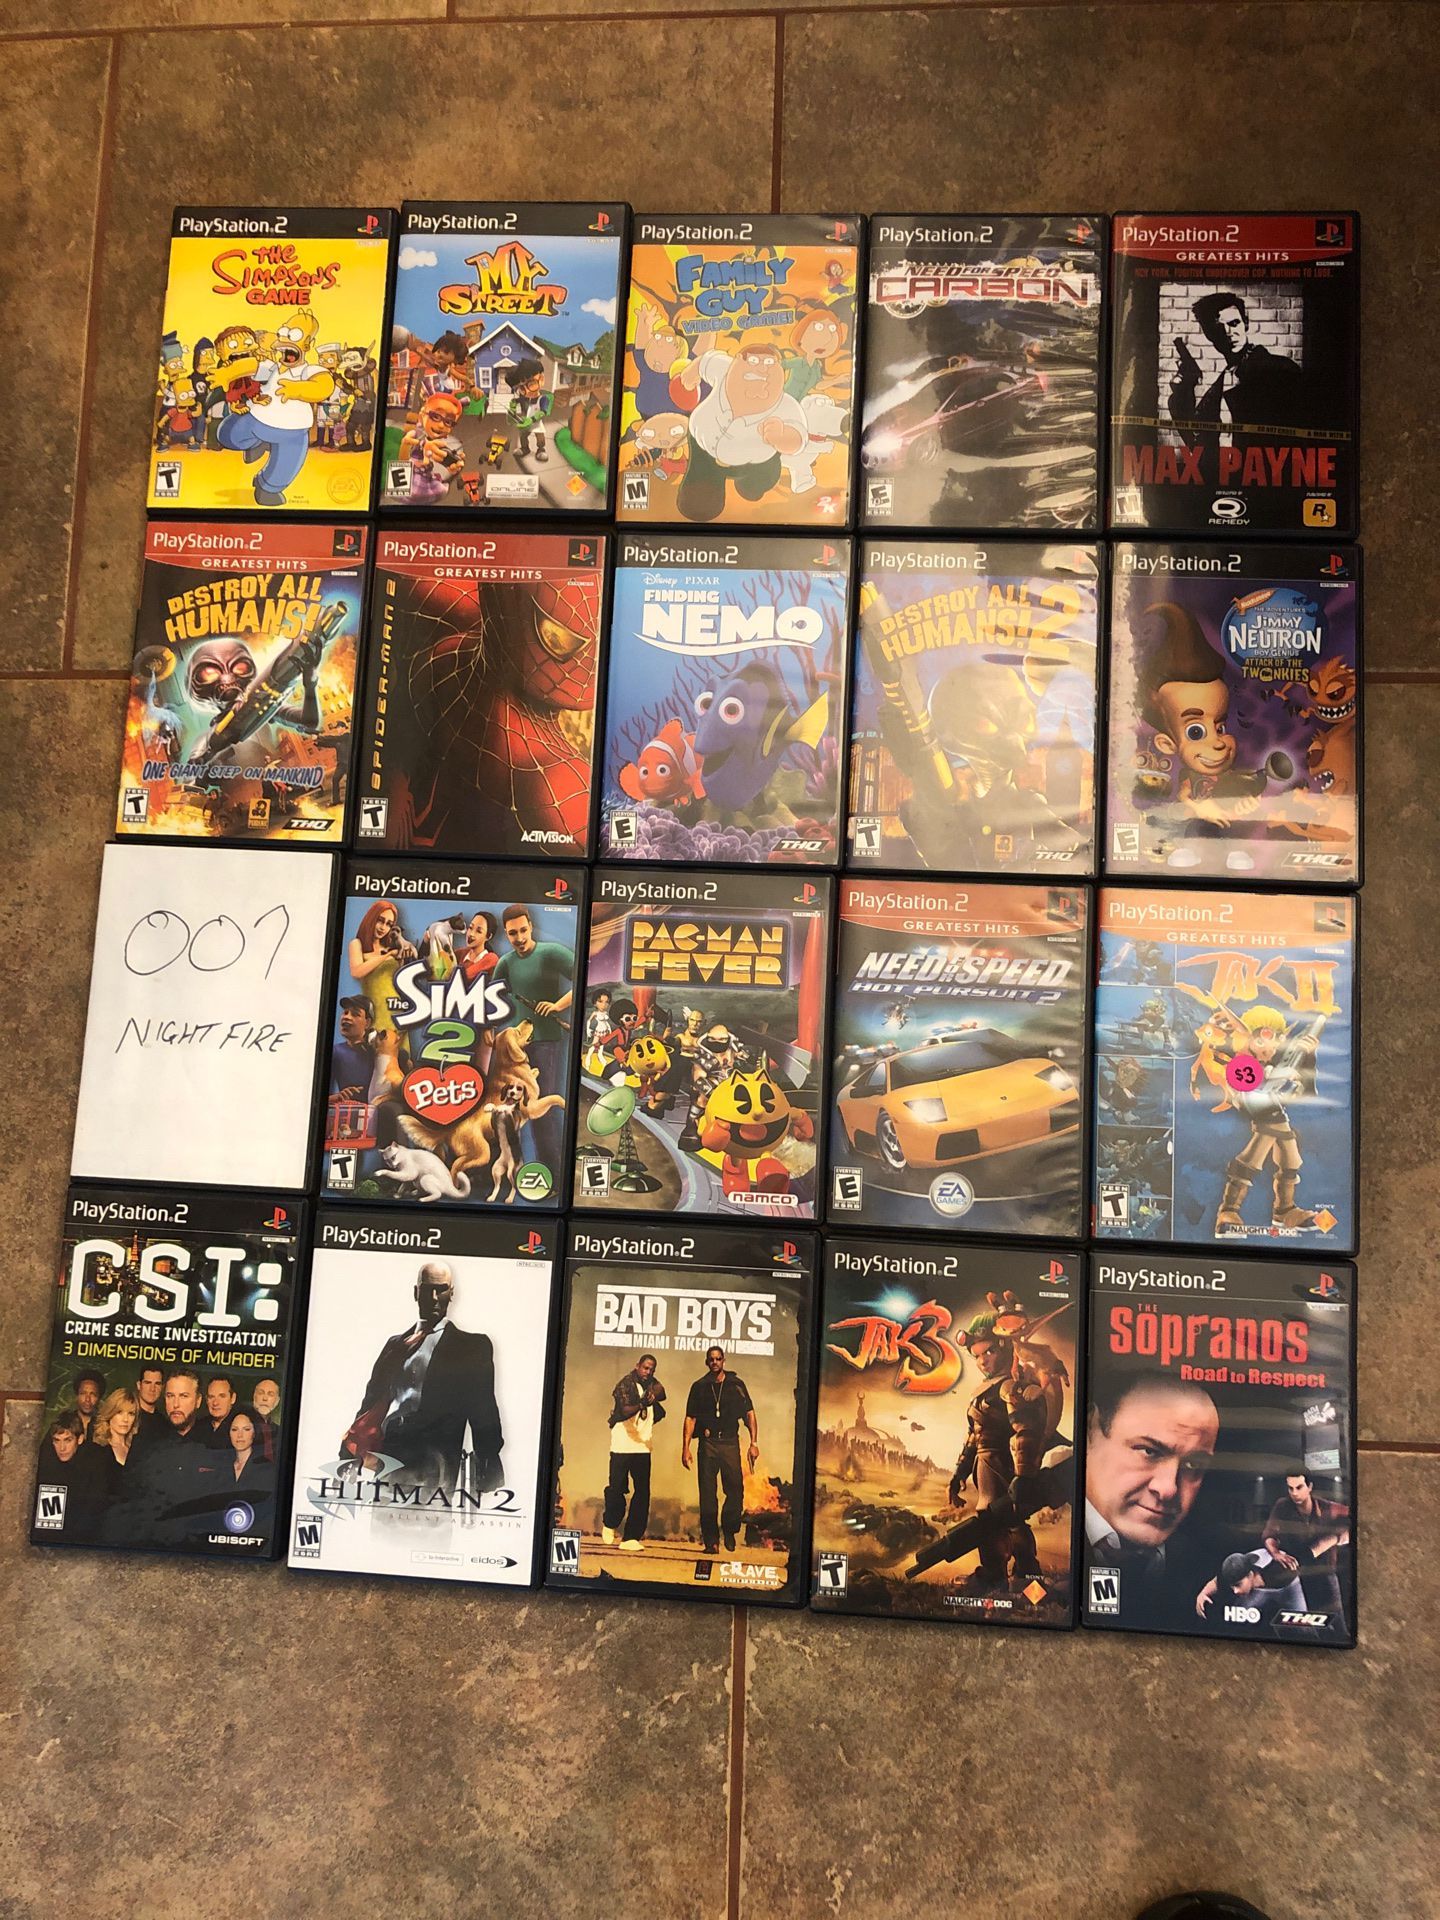 PS2 games. All very nice condition $60